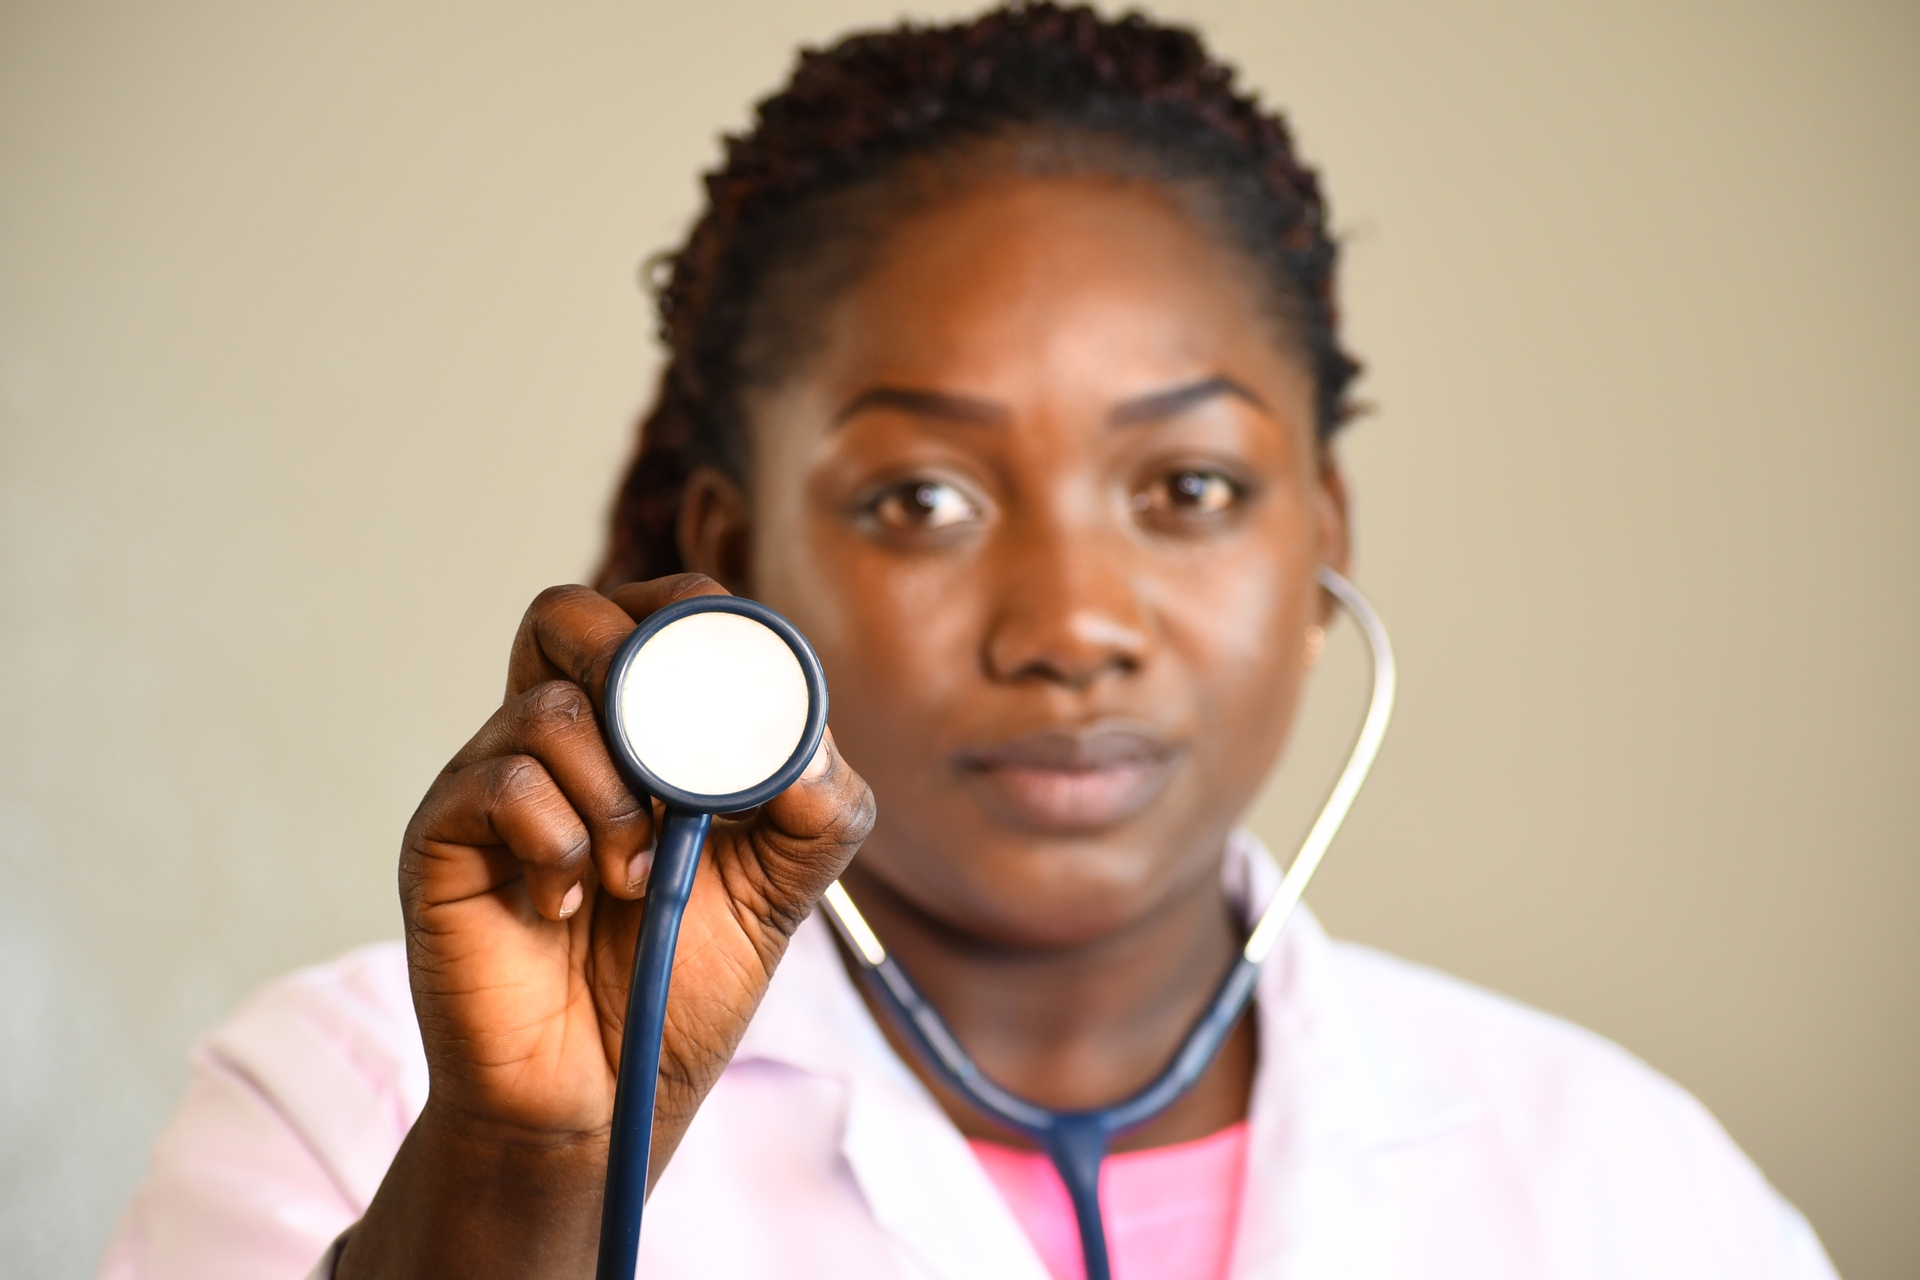 image of black doctor holding a stethoscope